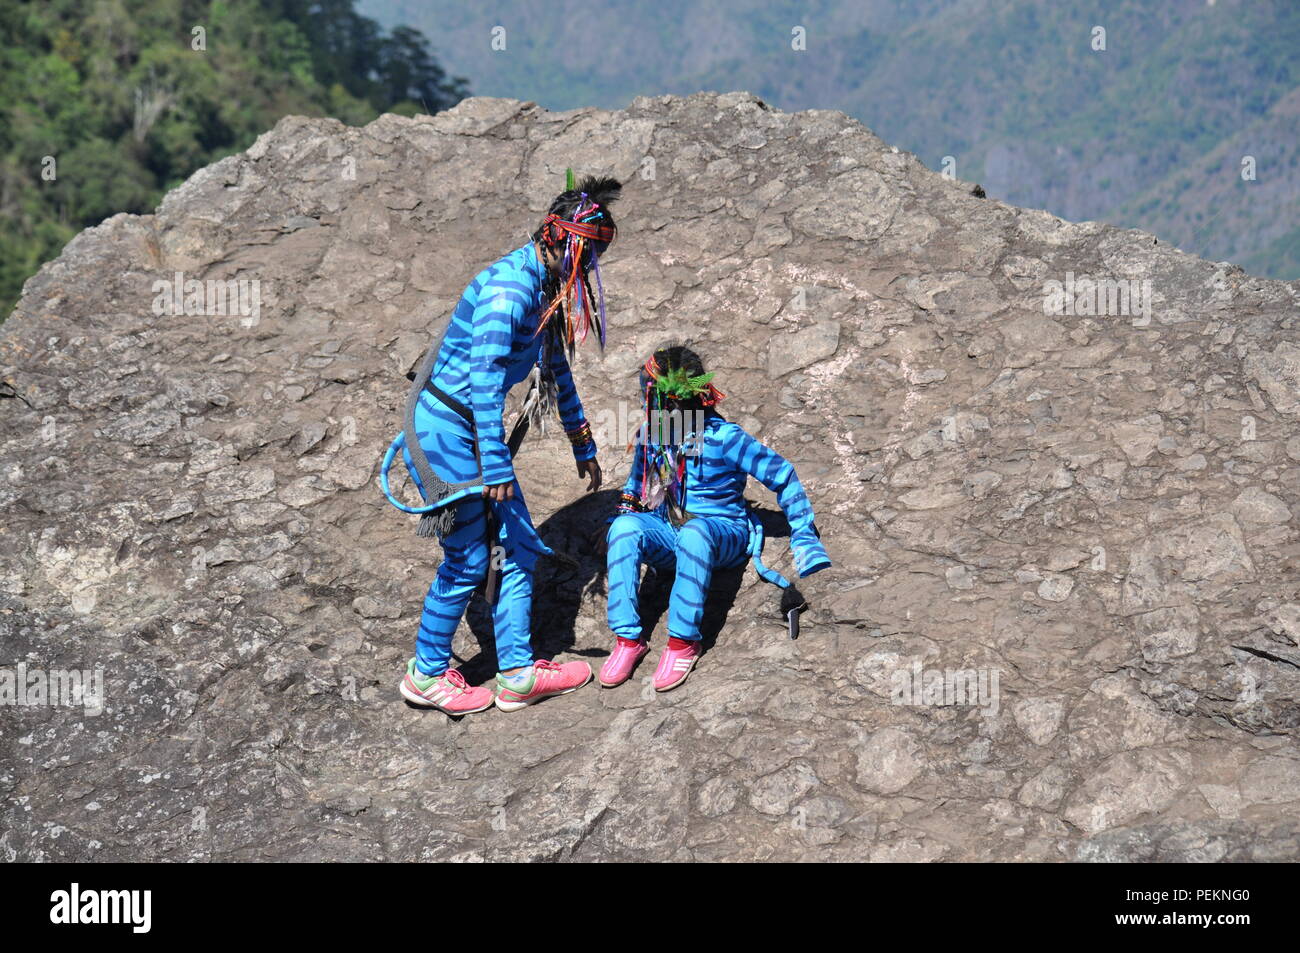 2 young avatar girls Keytiri & Feytiri from Pandora, arriving at mt. Ulap  from a long journey down to earth,& enjoying the high-noon sun Stock Photo  - Alamy